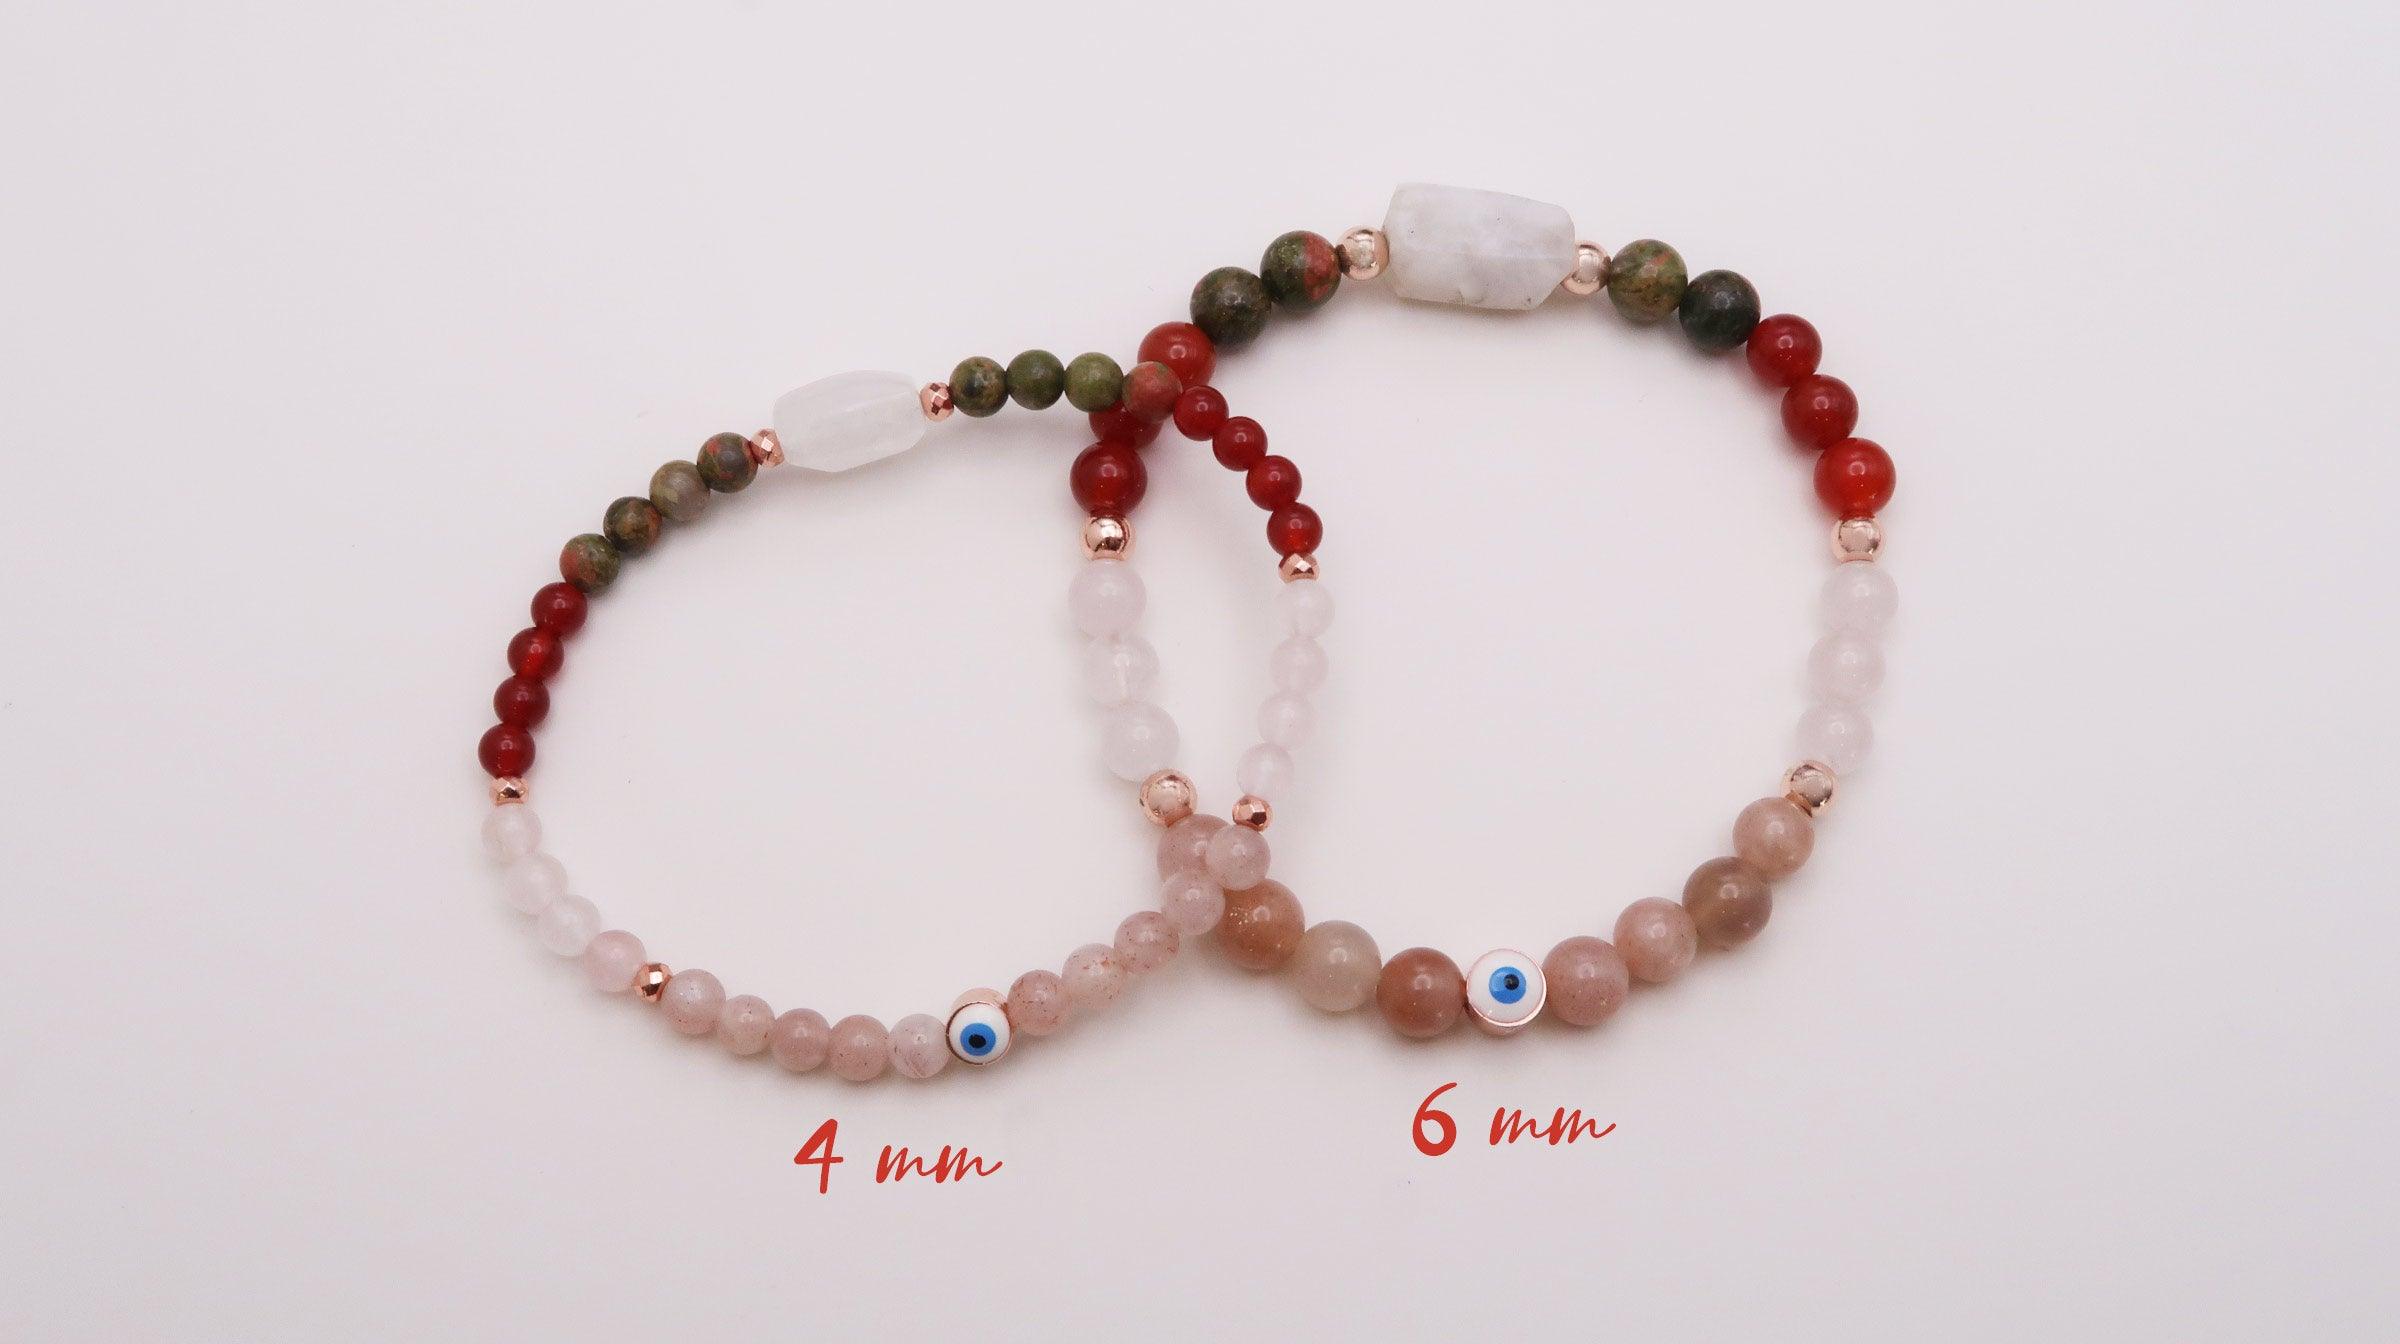 Fertility Journey and Positive Pregnancy bracelet with peach moonstone, rainbow moonestone, carnelian, rose quarts and an evil eye bead for protection. 